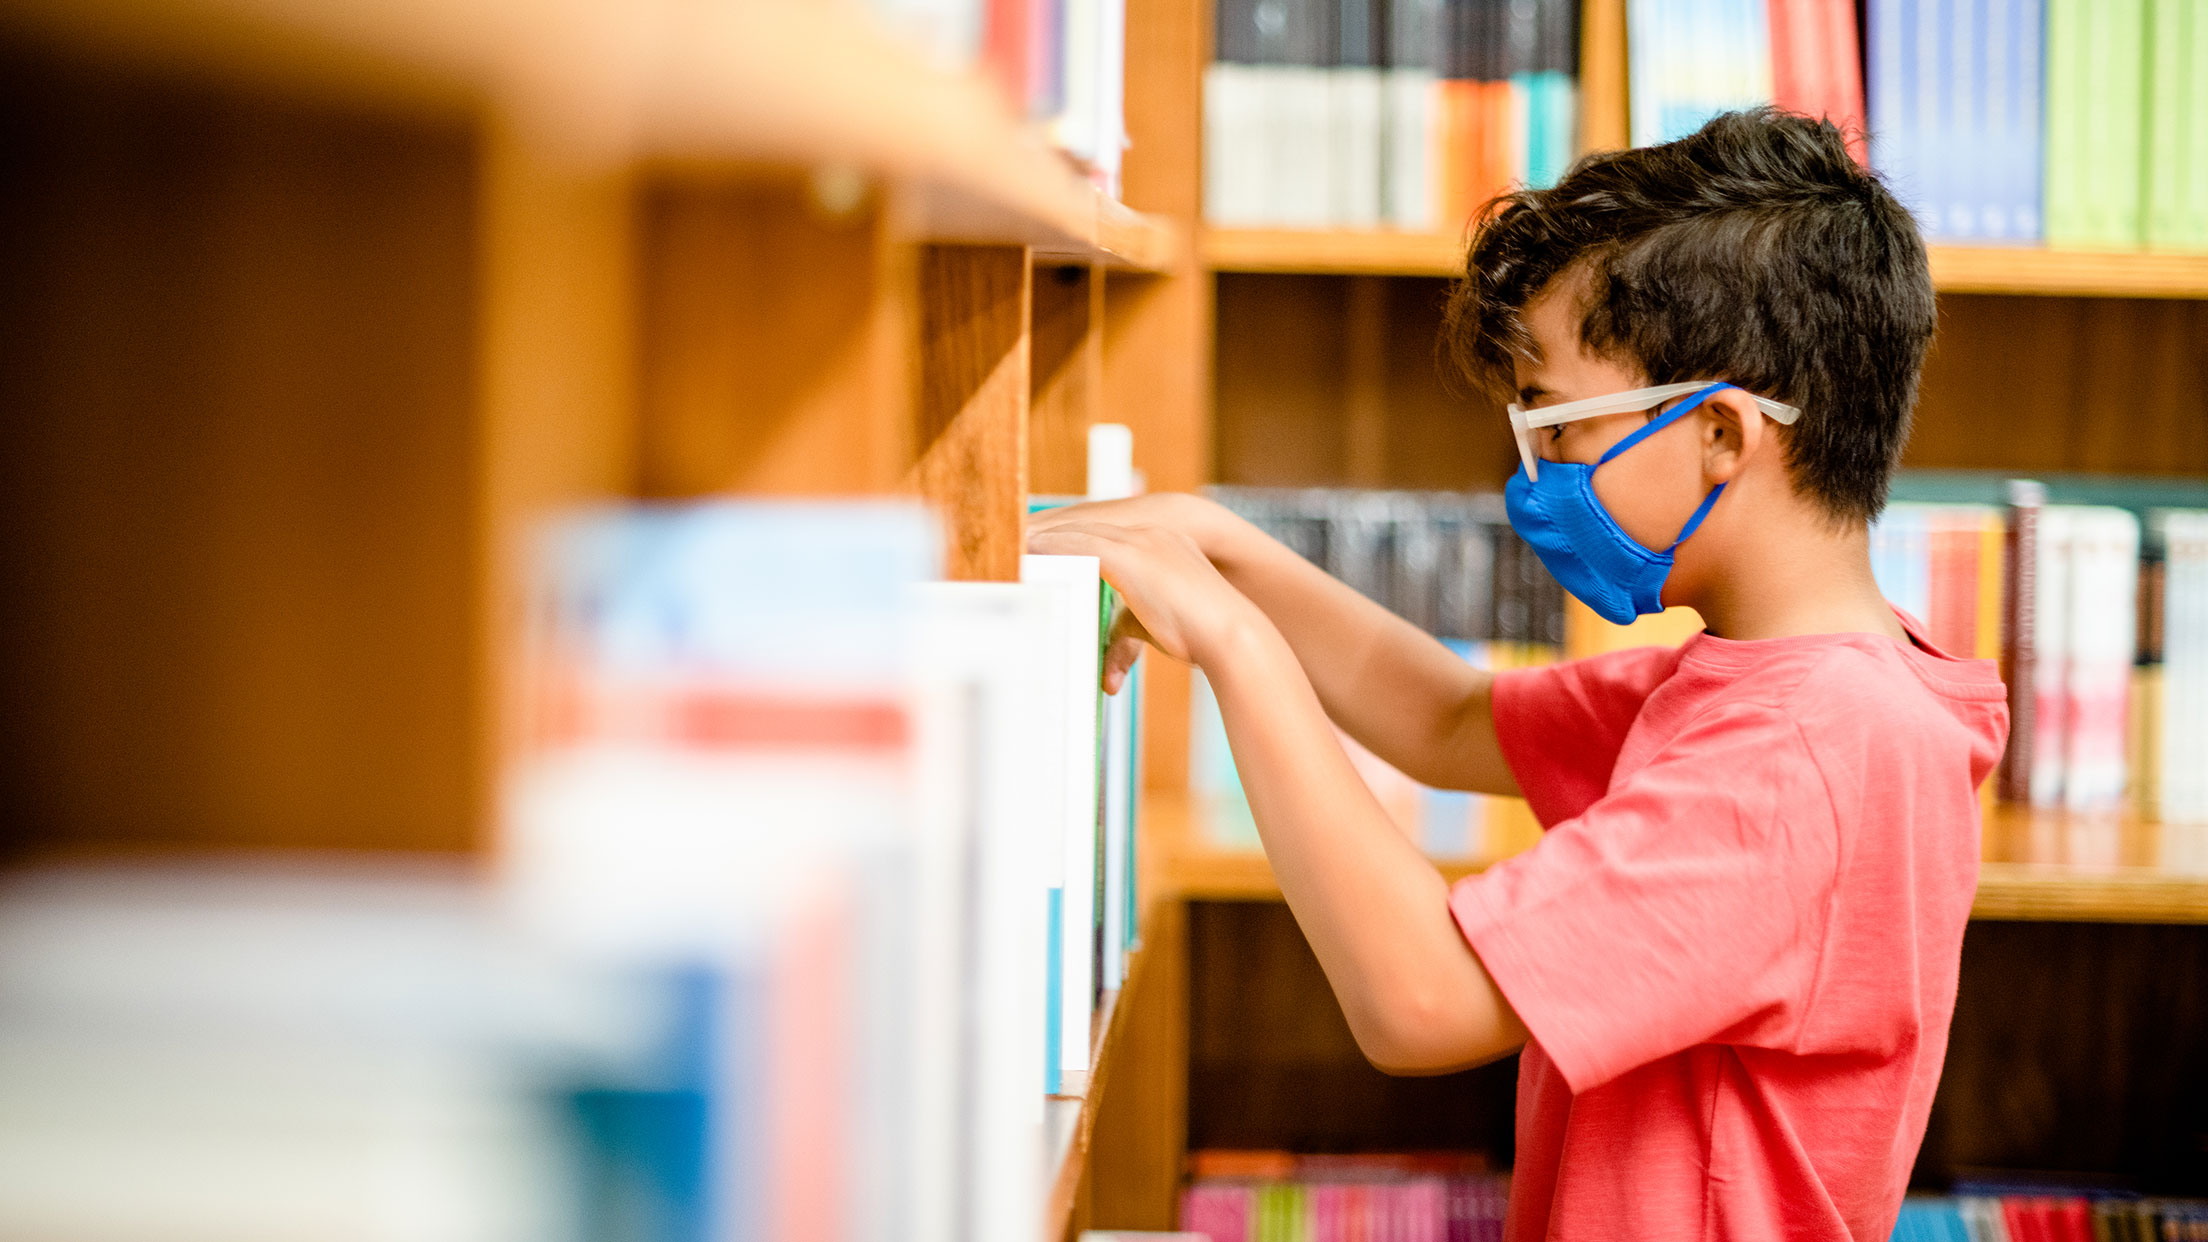 Little boy at library shelf looking at books